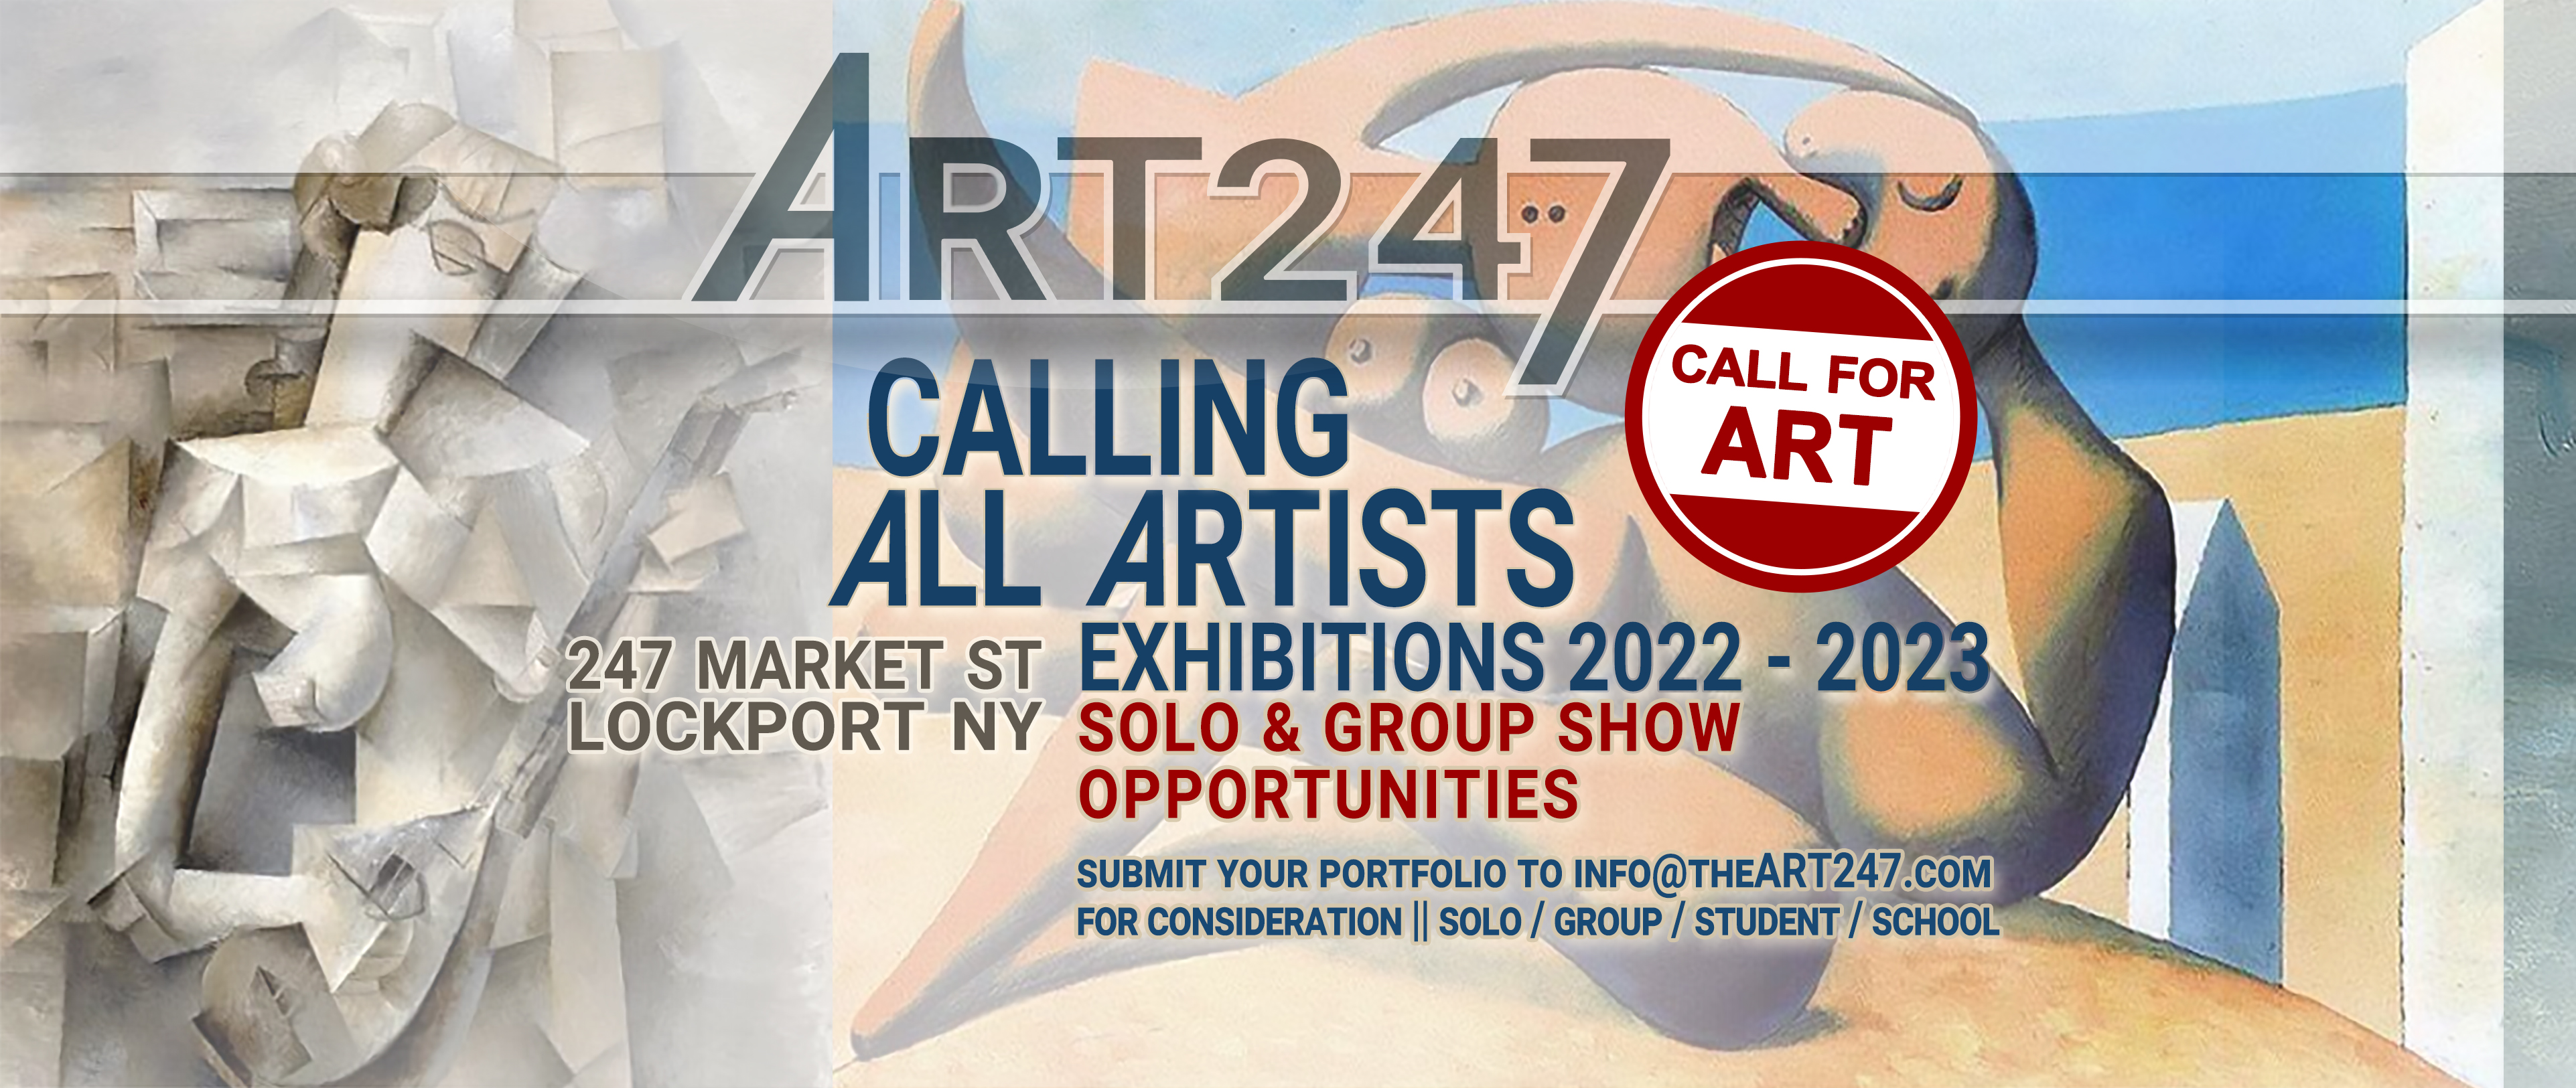 CALL FOR ART | Solo & Group Exhibition 2022 - 2023